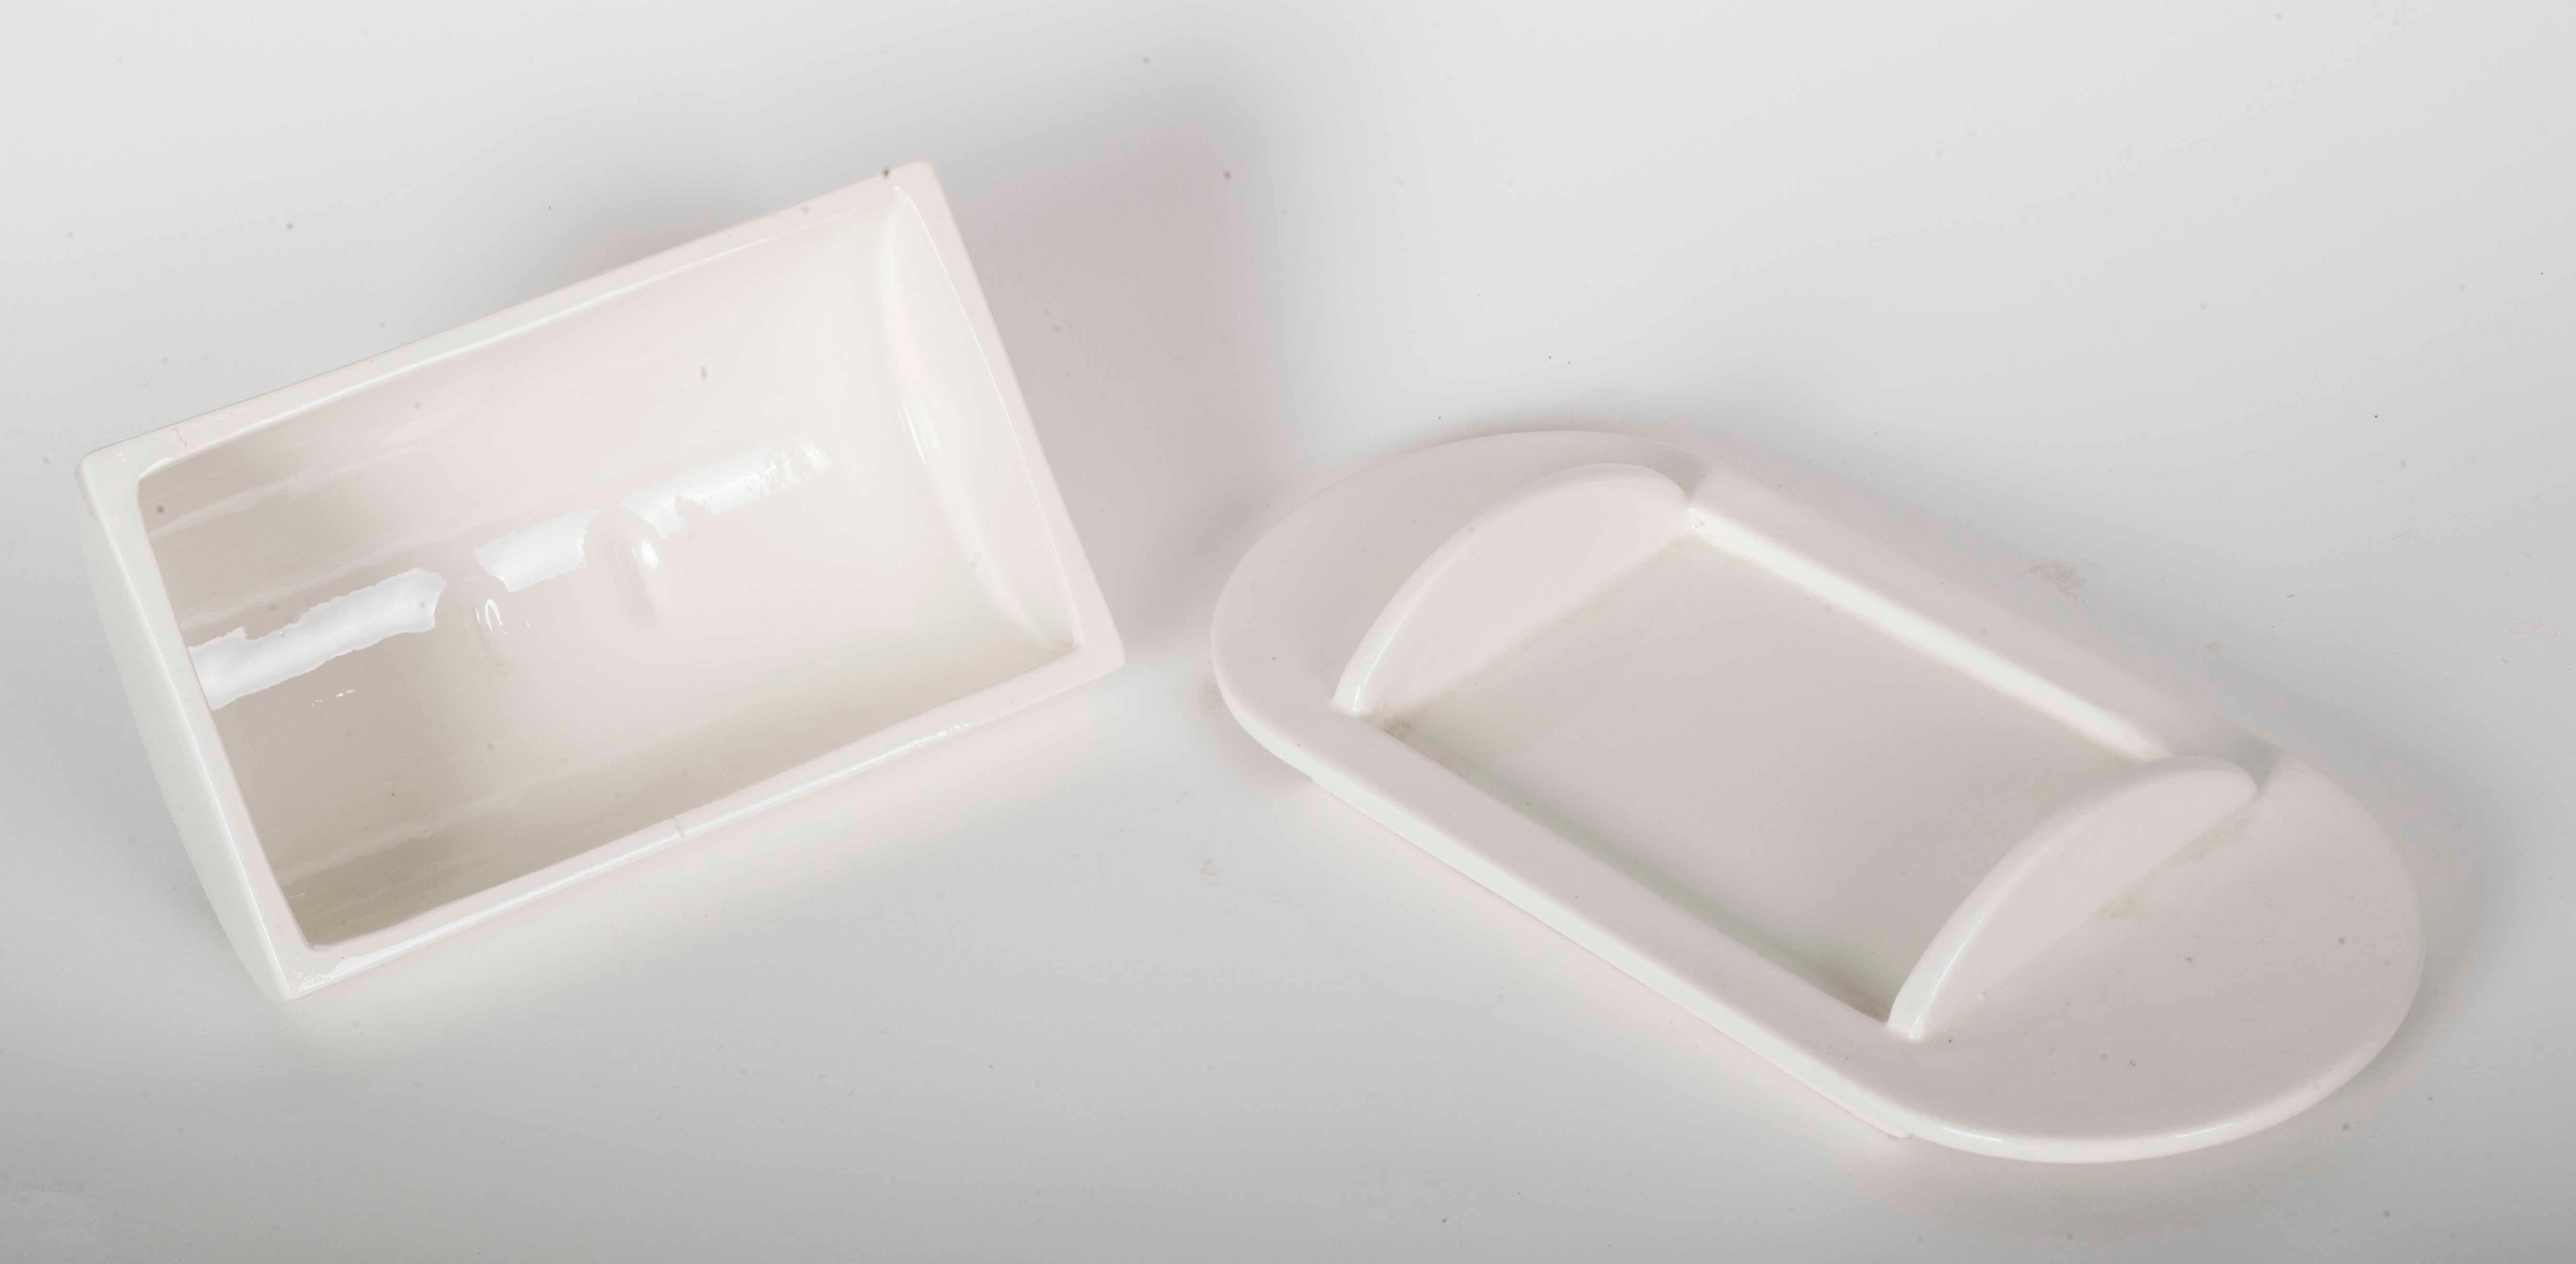 White butter dish with green and pink holders by Marco Zanini for the Hollywood series.
This piece is part of a tableware collection named Hollywood. Mark at the bottom and documented.